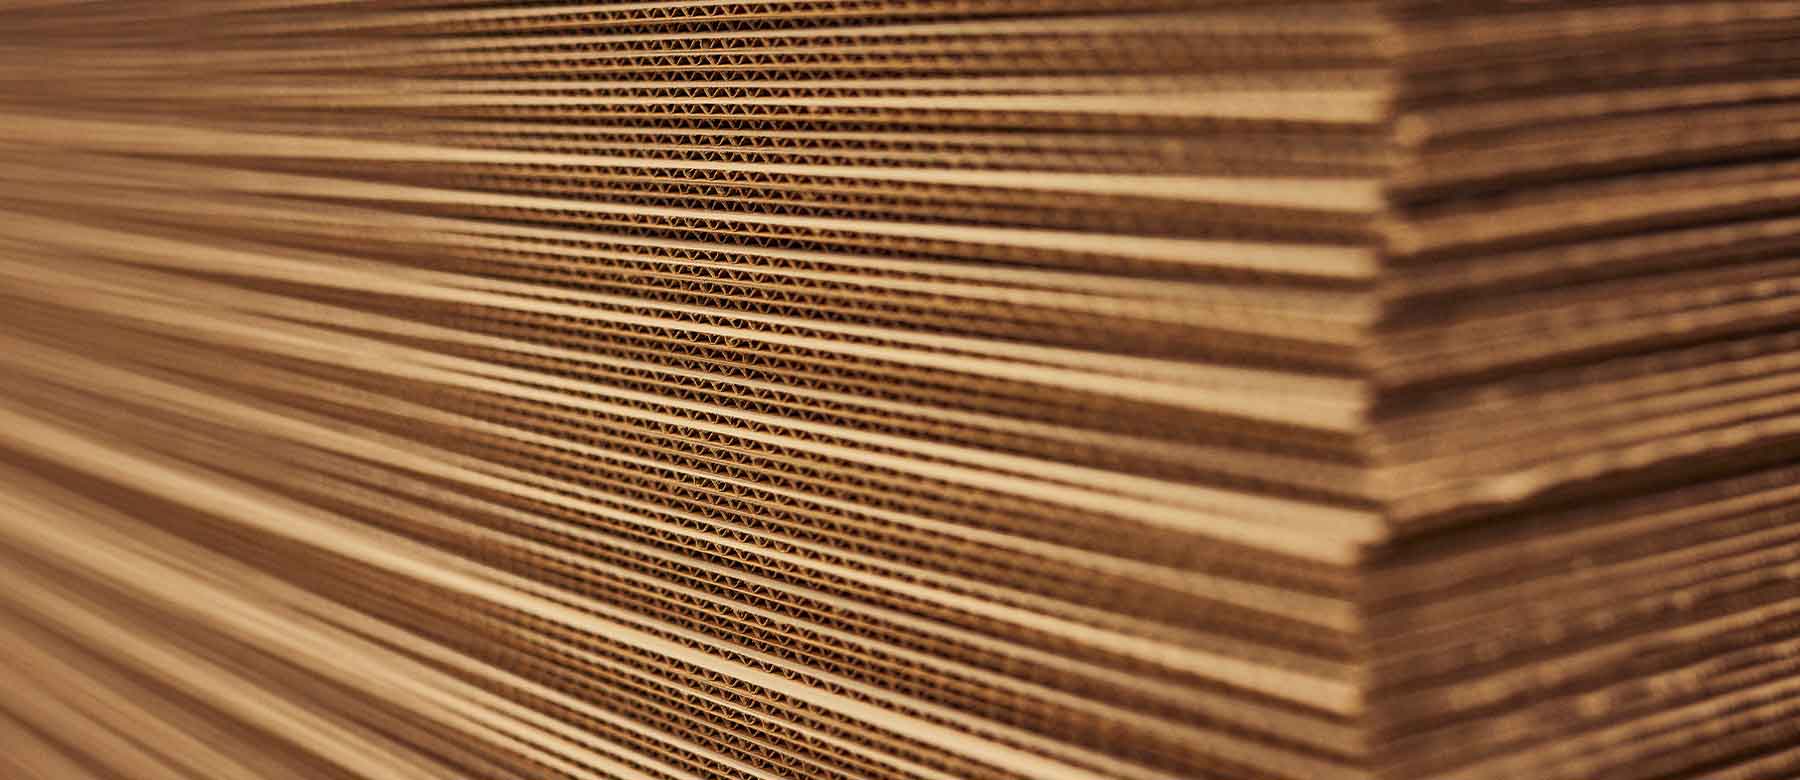 Corrugated cardboard knowledge from THIMM